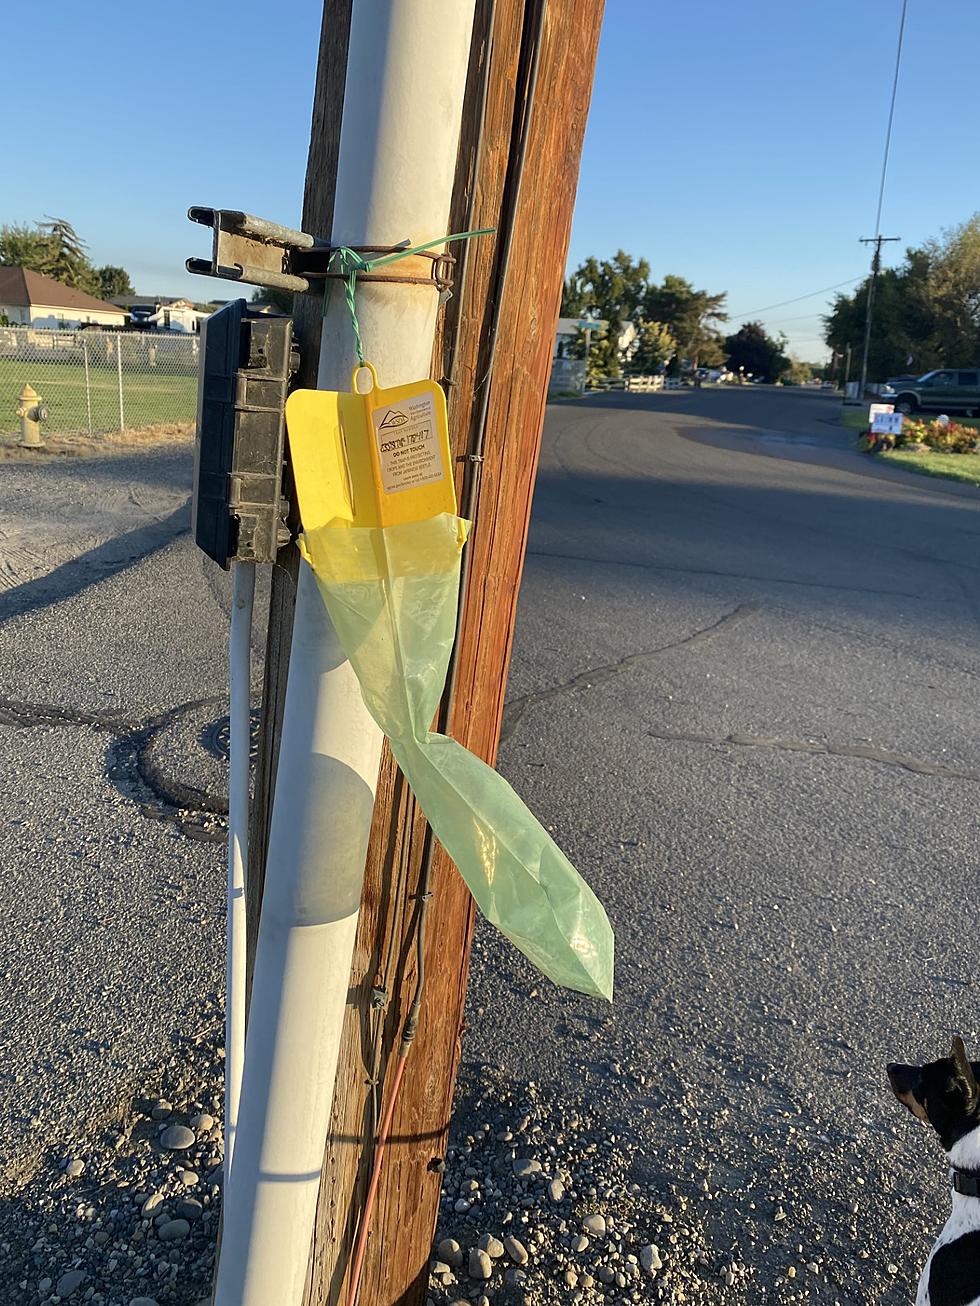 DON’T TOUCH These Green Bags on Utility Poles in Tri-Cities